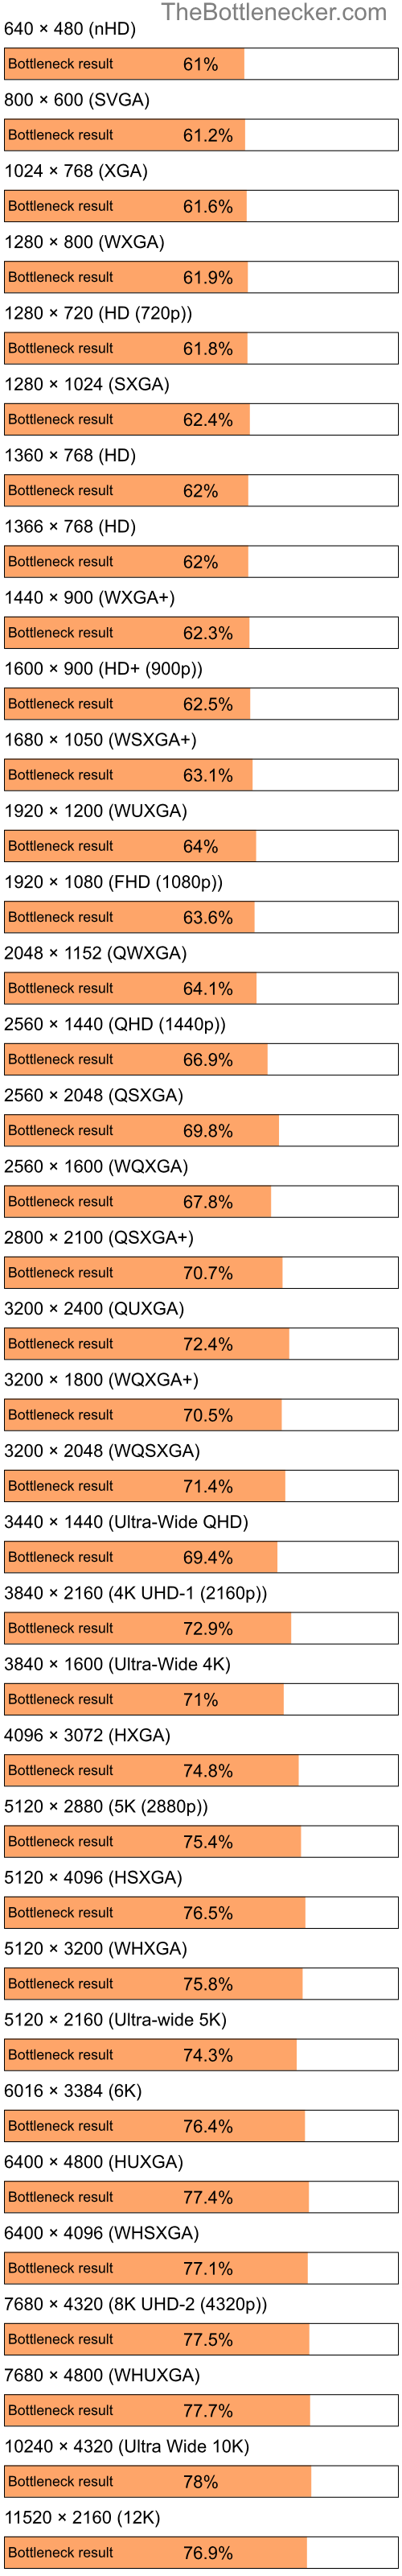 Bottleneck results by resolution for Intel Pentium 4 and NVIDIA GeForce 9400M in General Tasks